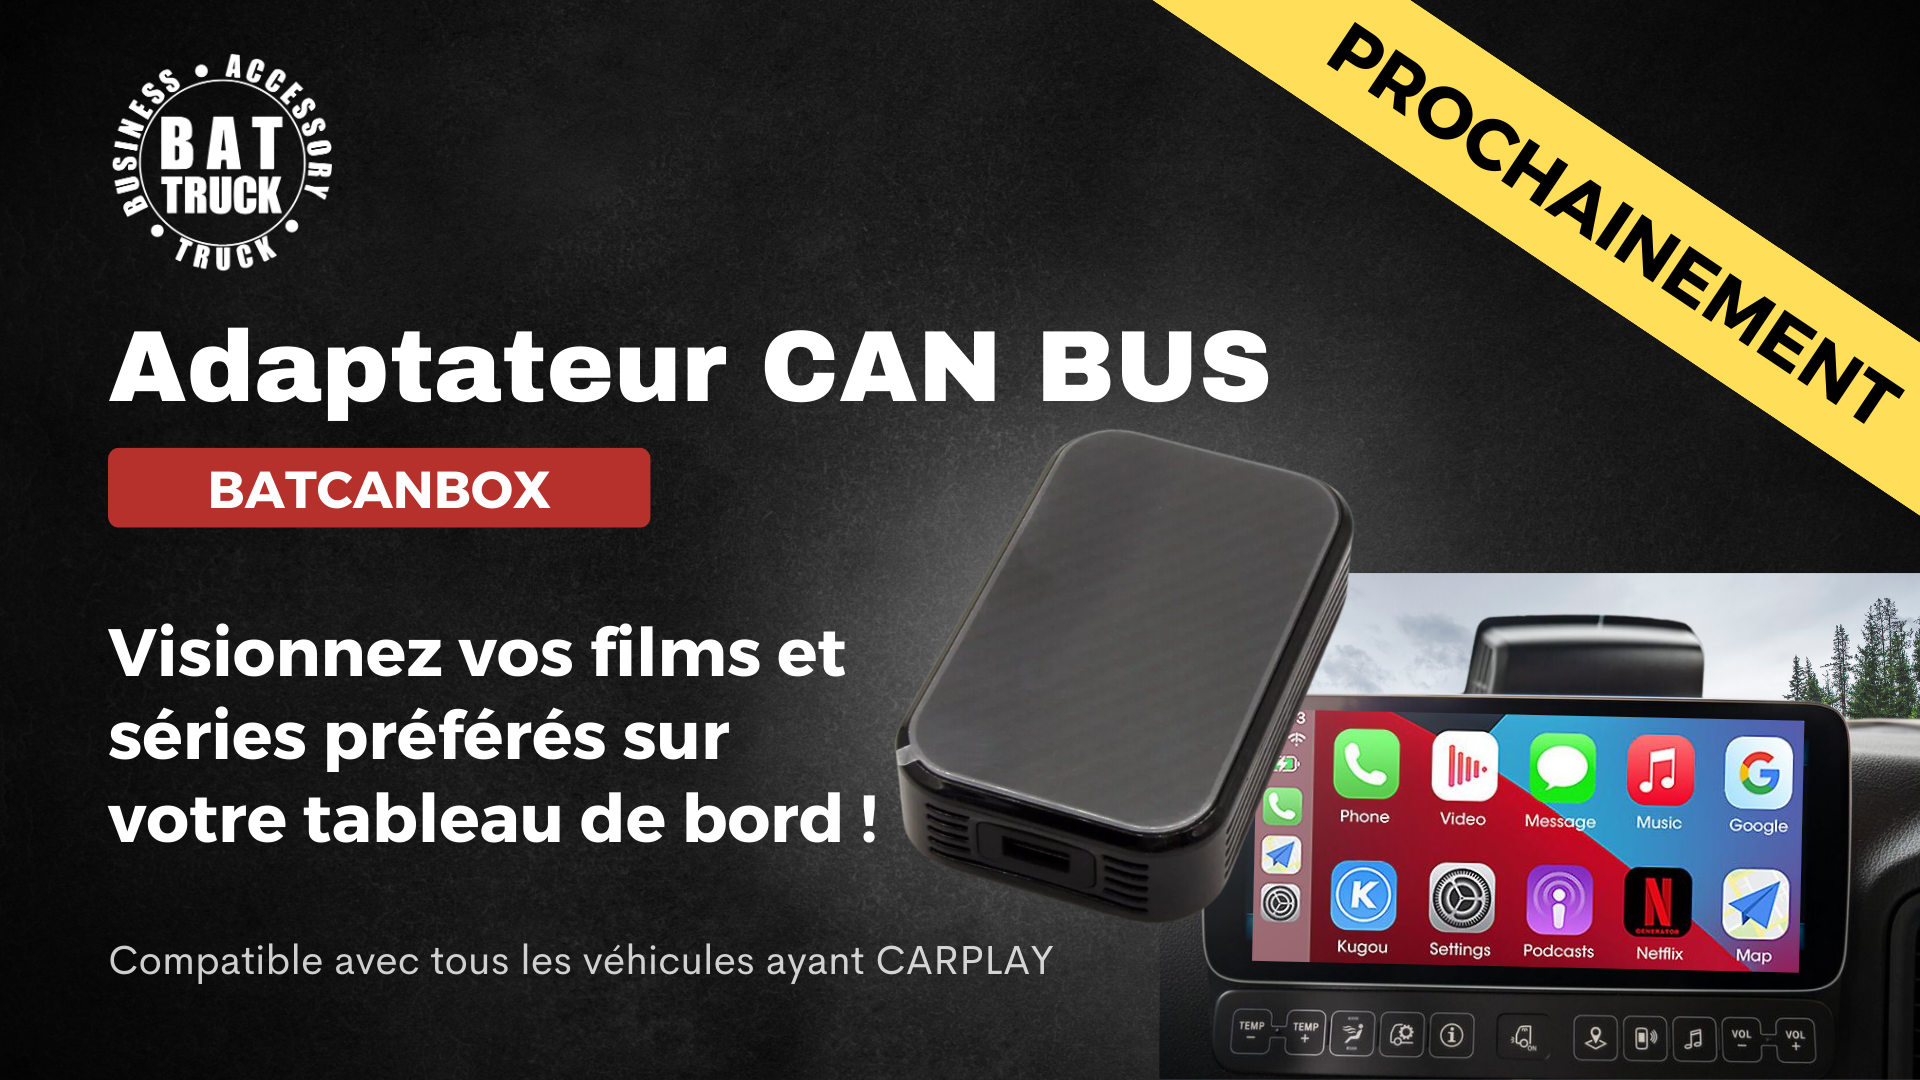 Adaptateur CAN BUS